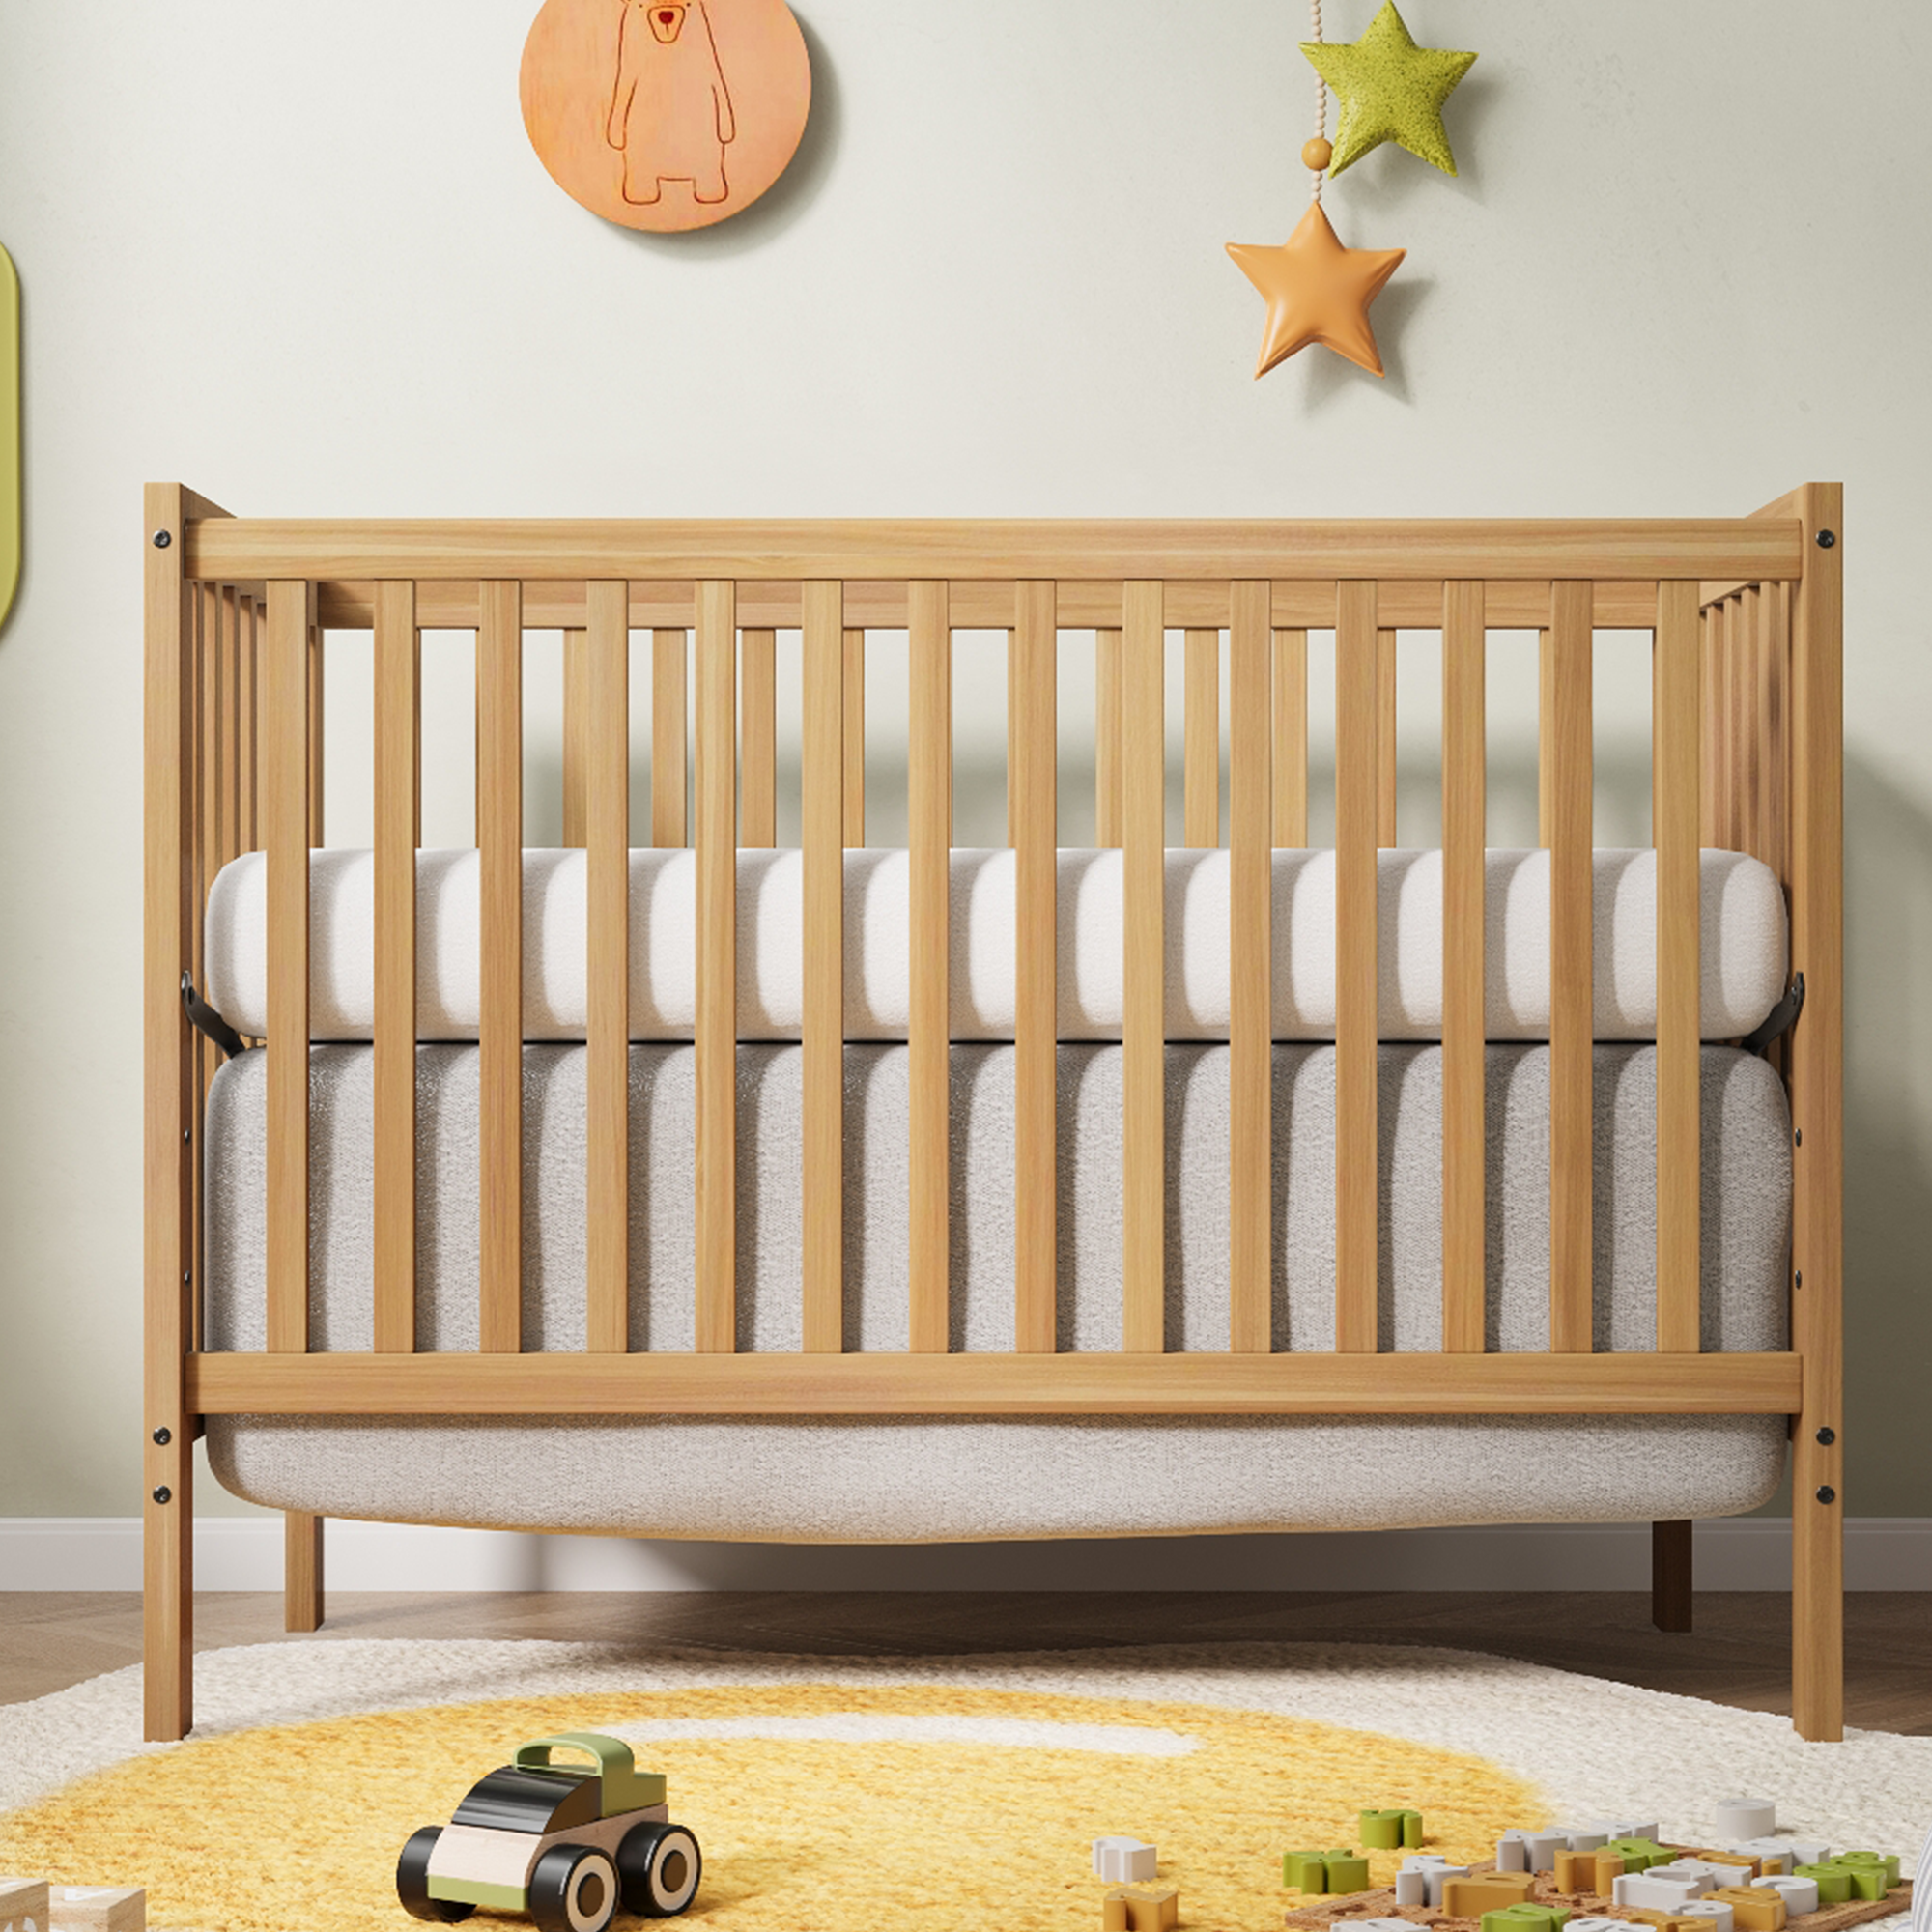 Sesslife 5-In-1 Convertible Crib, Baby Bed, Converts from Baby Crib to Toddler Bed, Fits Standard Full-Size Crib Mattress ,Easy to Assemble(Natural) - image 1 of 9